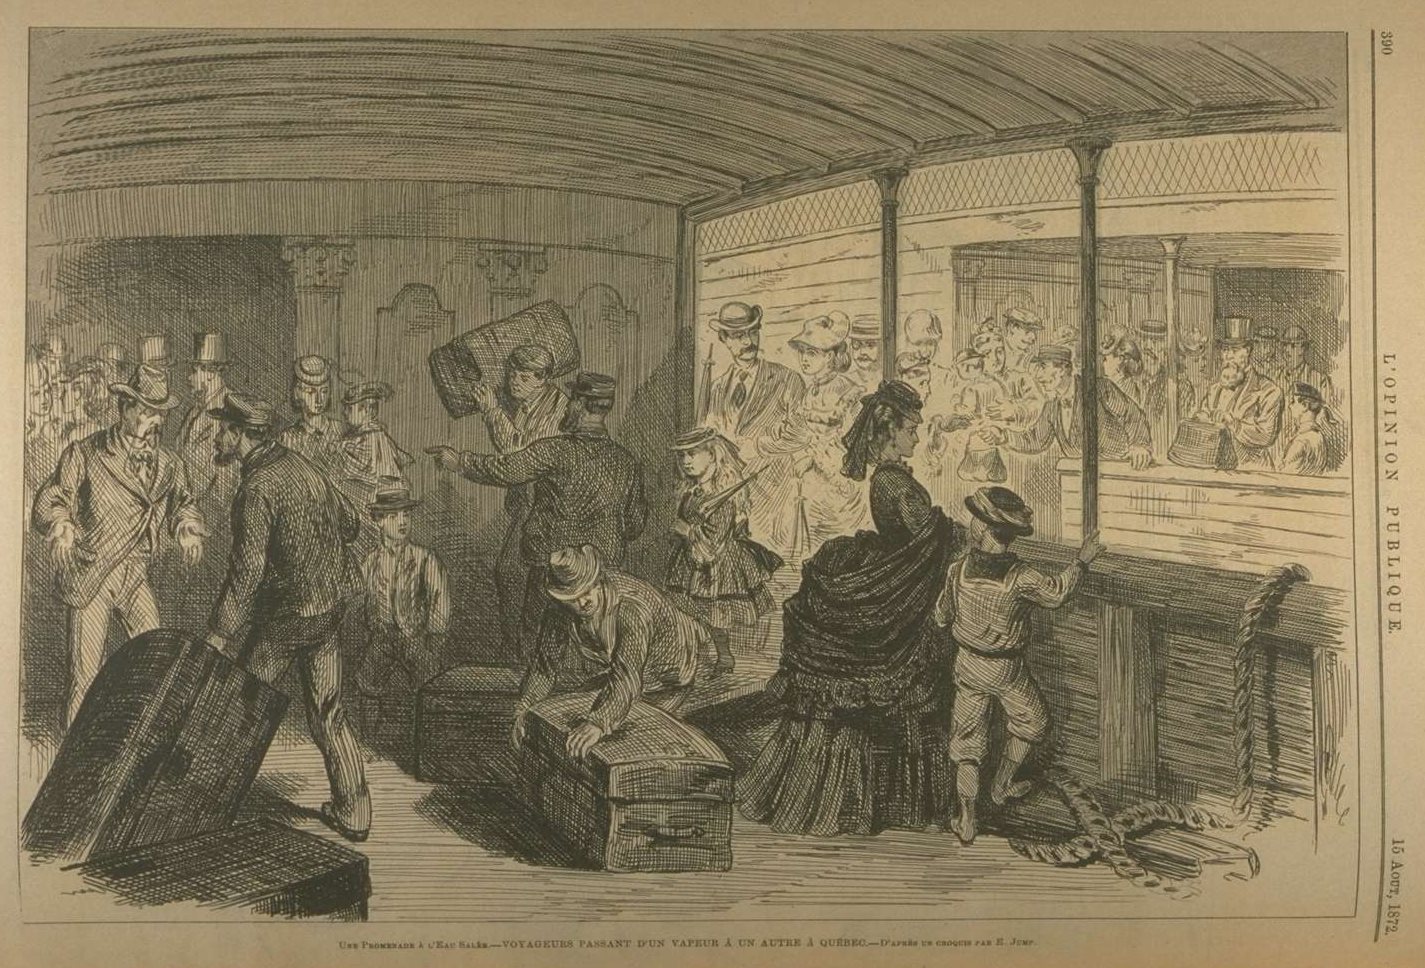 An engraving of employees busily loading suitcases a ship’s deck as passengers arrive.